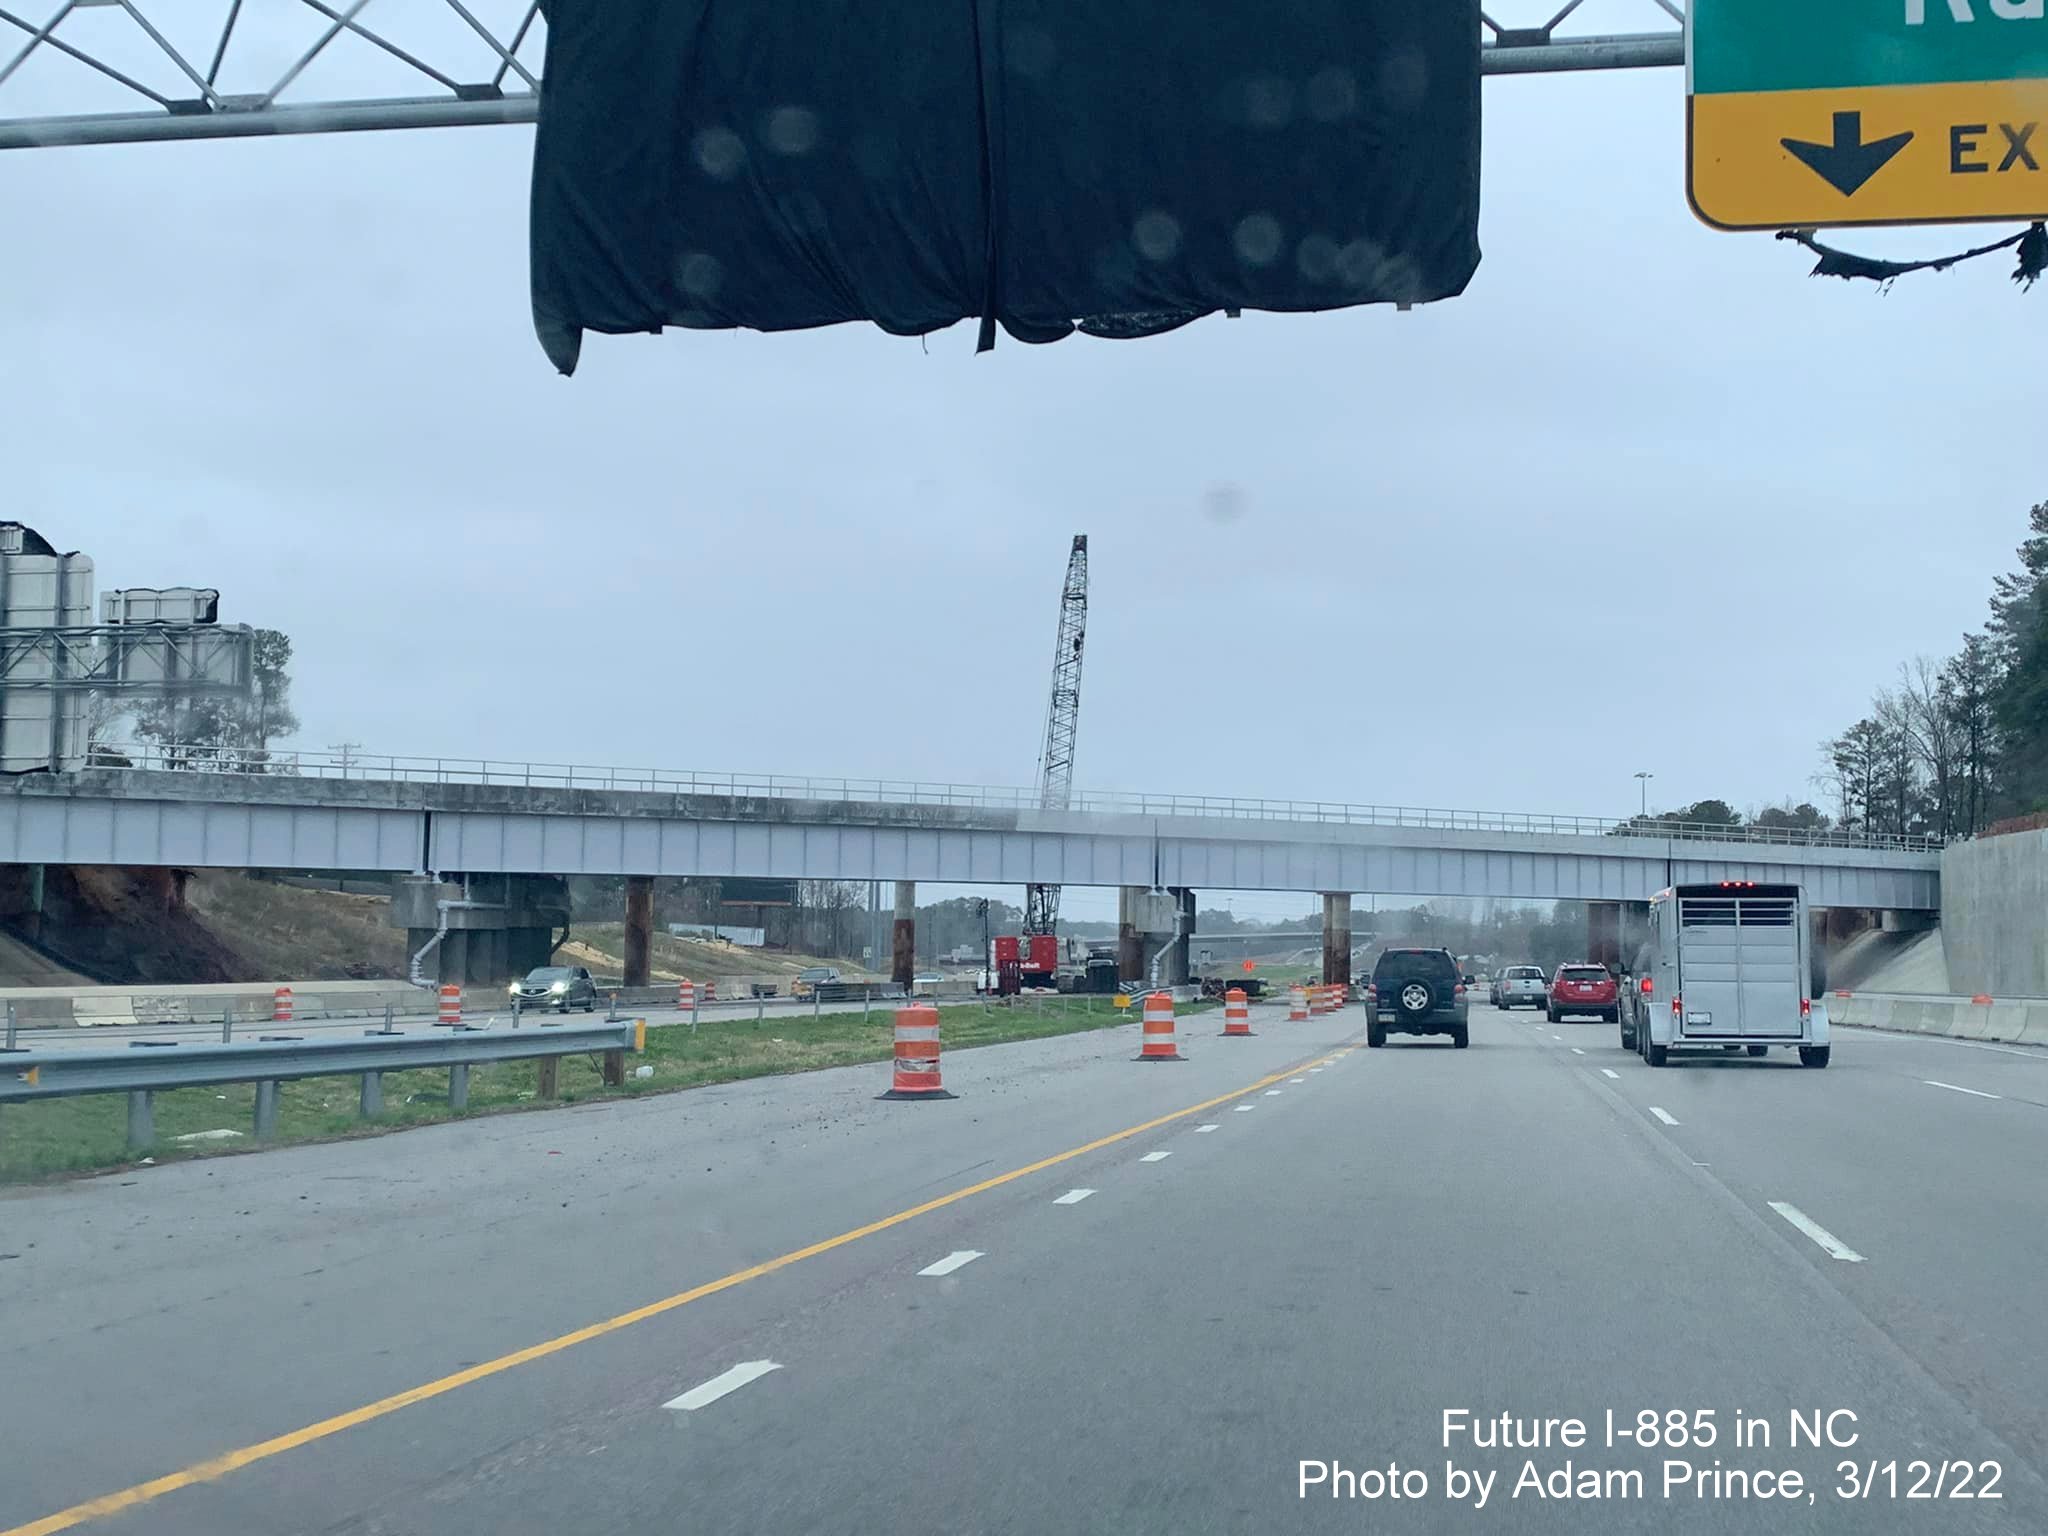 Image of railroad bridge demolition over US 70 (Future I-885) in Durham prior to East End Connector exit, by Adam Prince, March 2022